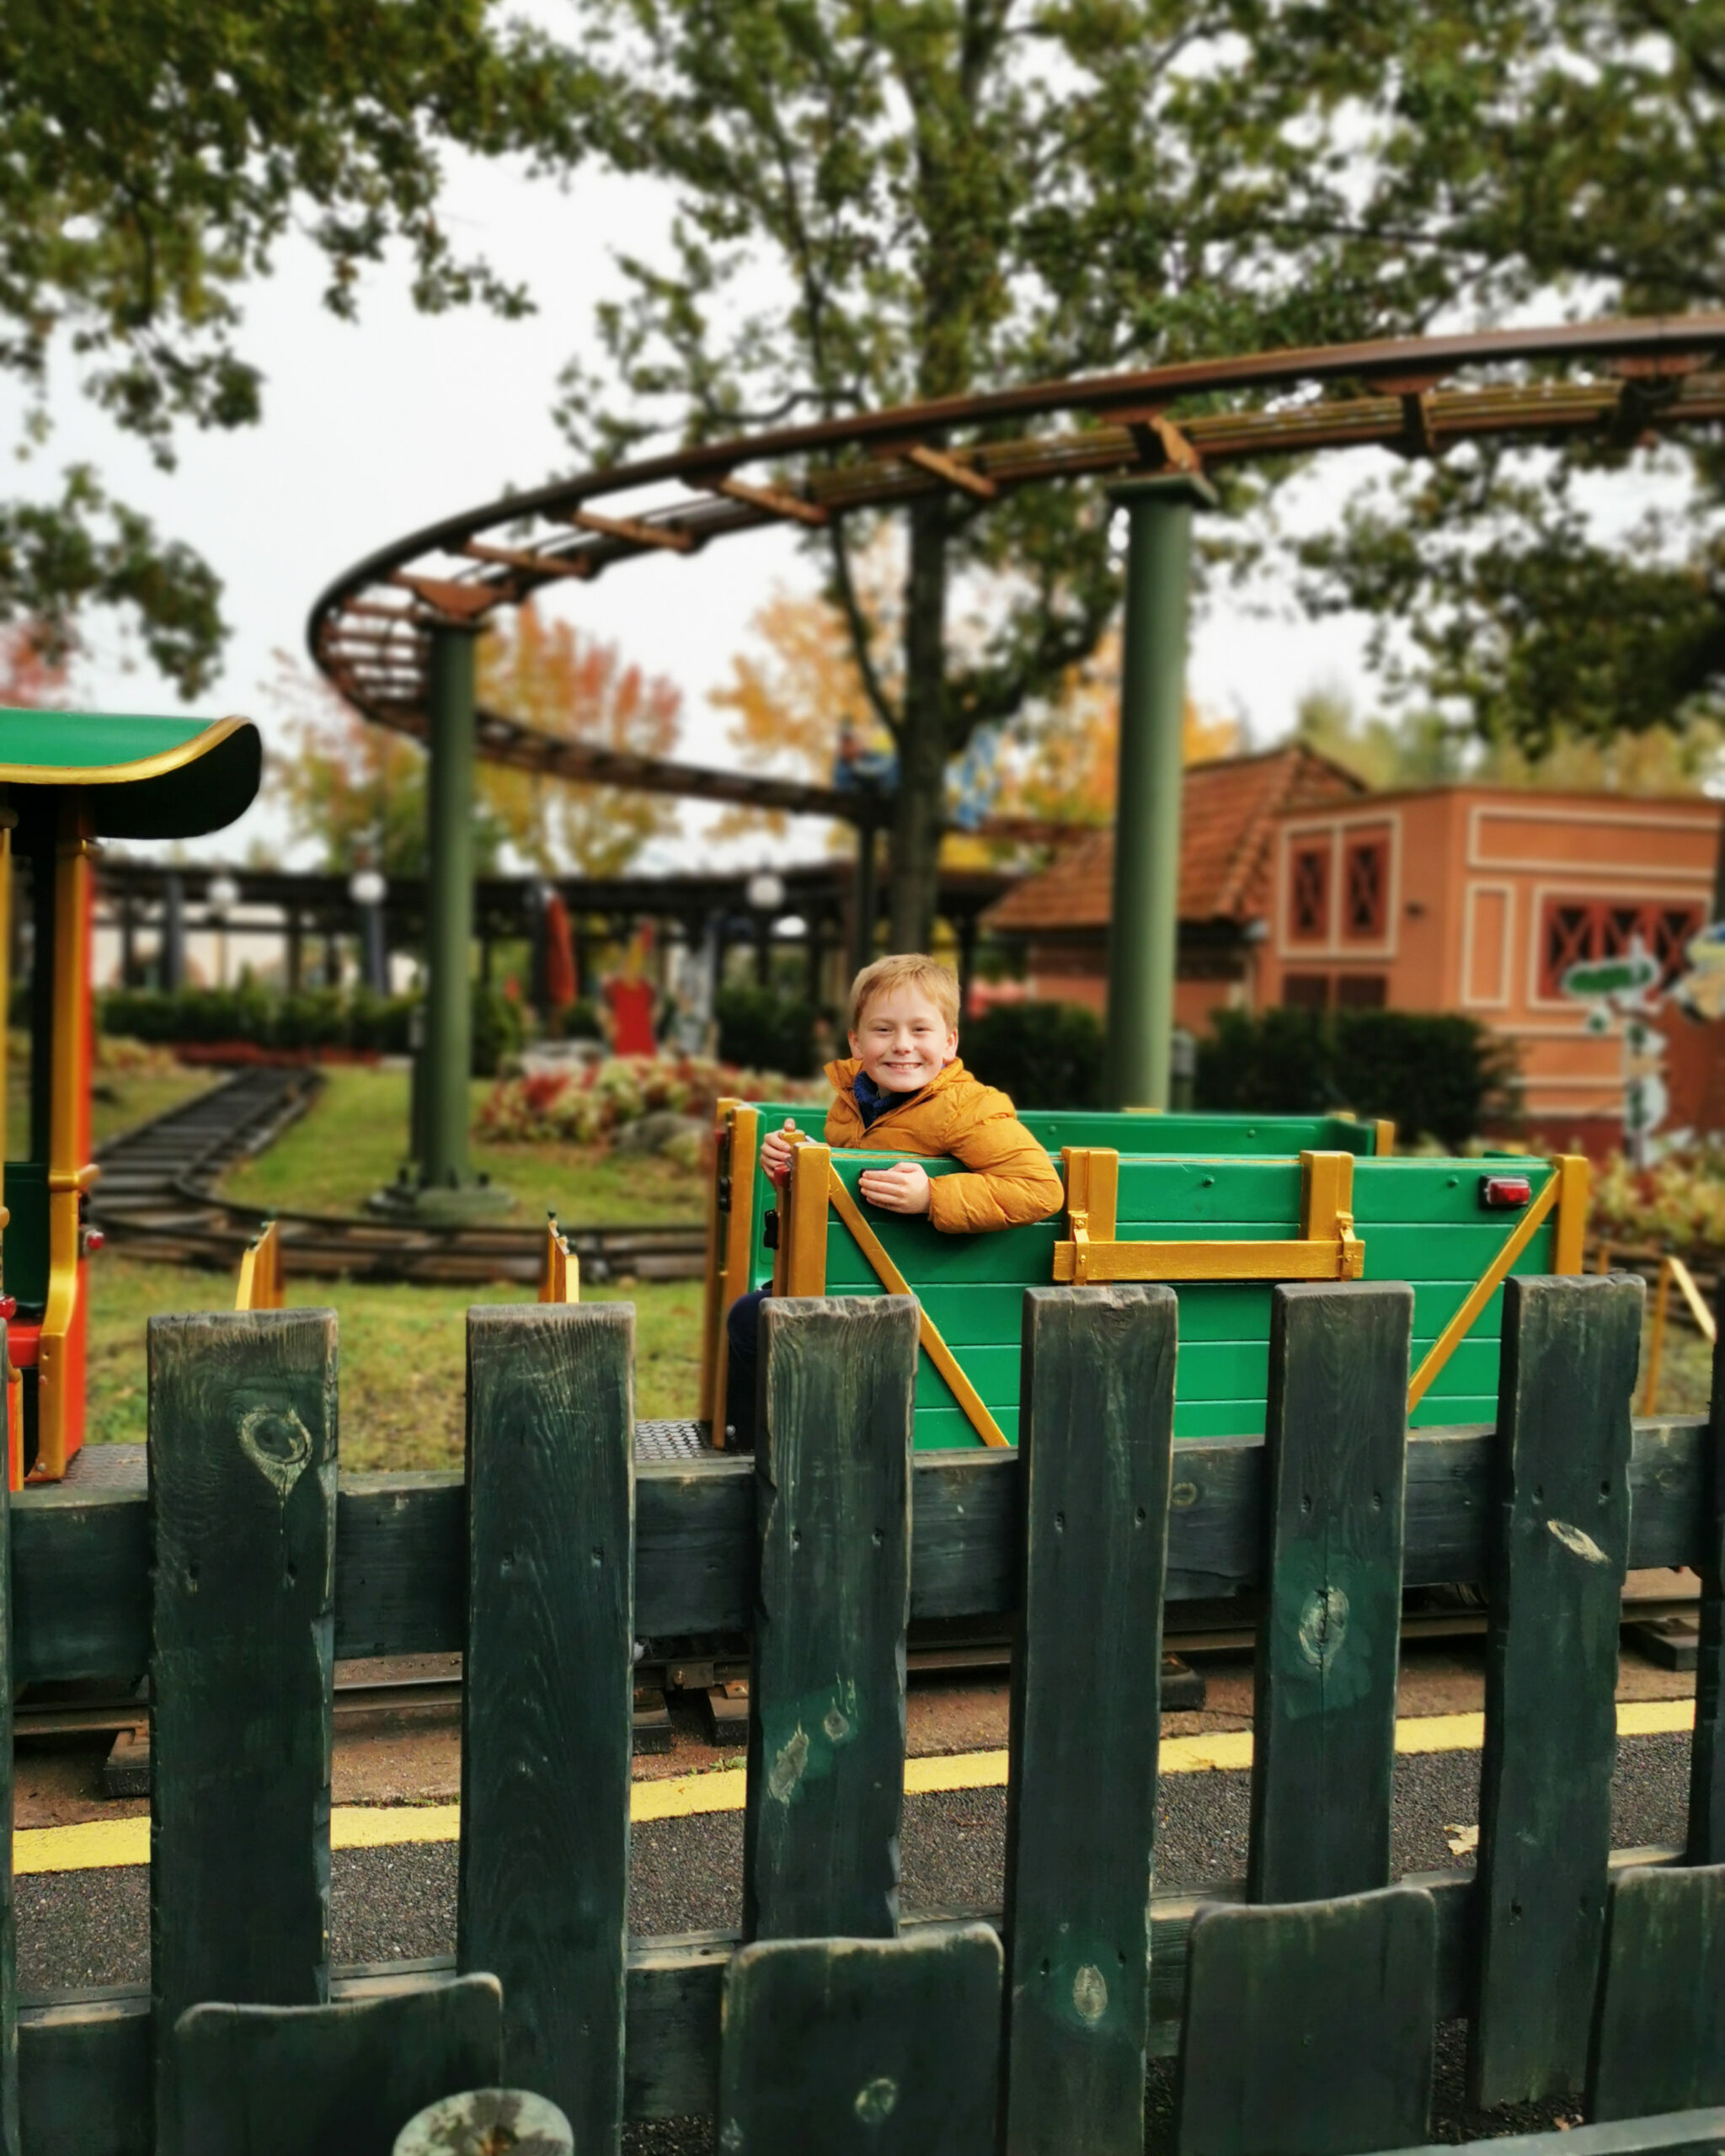 Parc Astérix, Overnight Stay, Halloween 2023, Theme Park, French Trip, October Half-Term, Family-Friendly, Amusement Park, Near Paris, things to do in France, Parc Astérix Review, Astérix & Obélix, the Frenchie Mummy, 